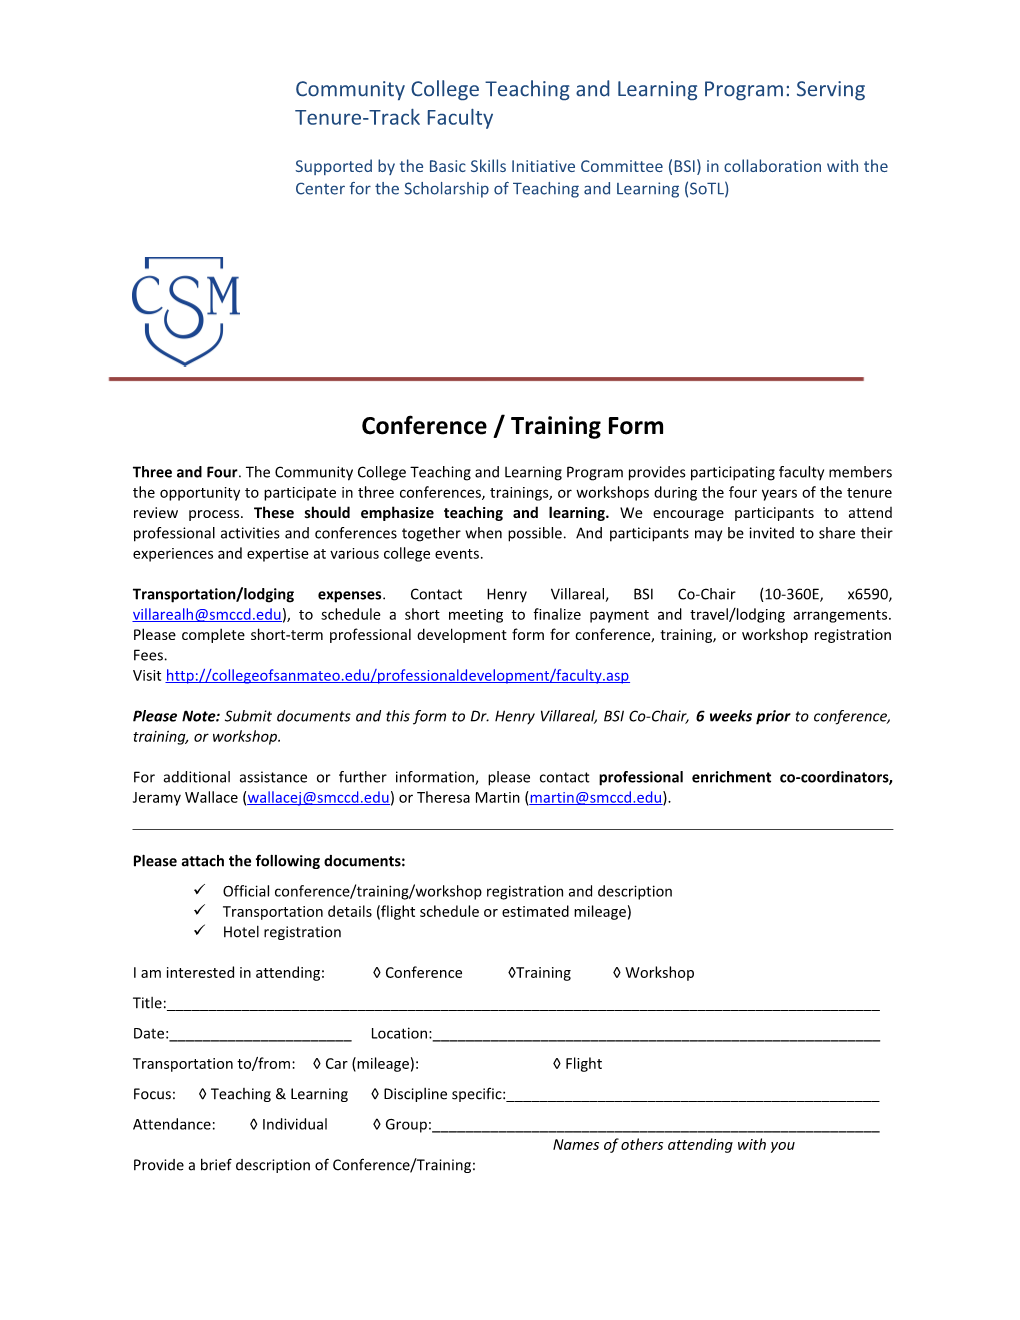 Conference / Training Form